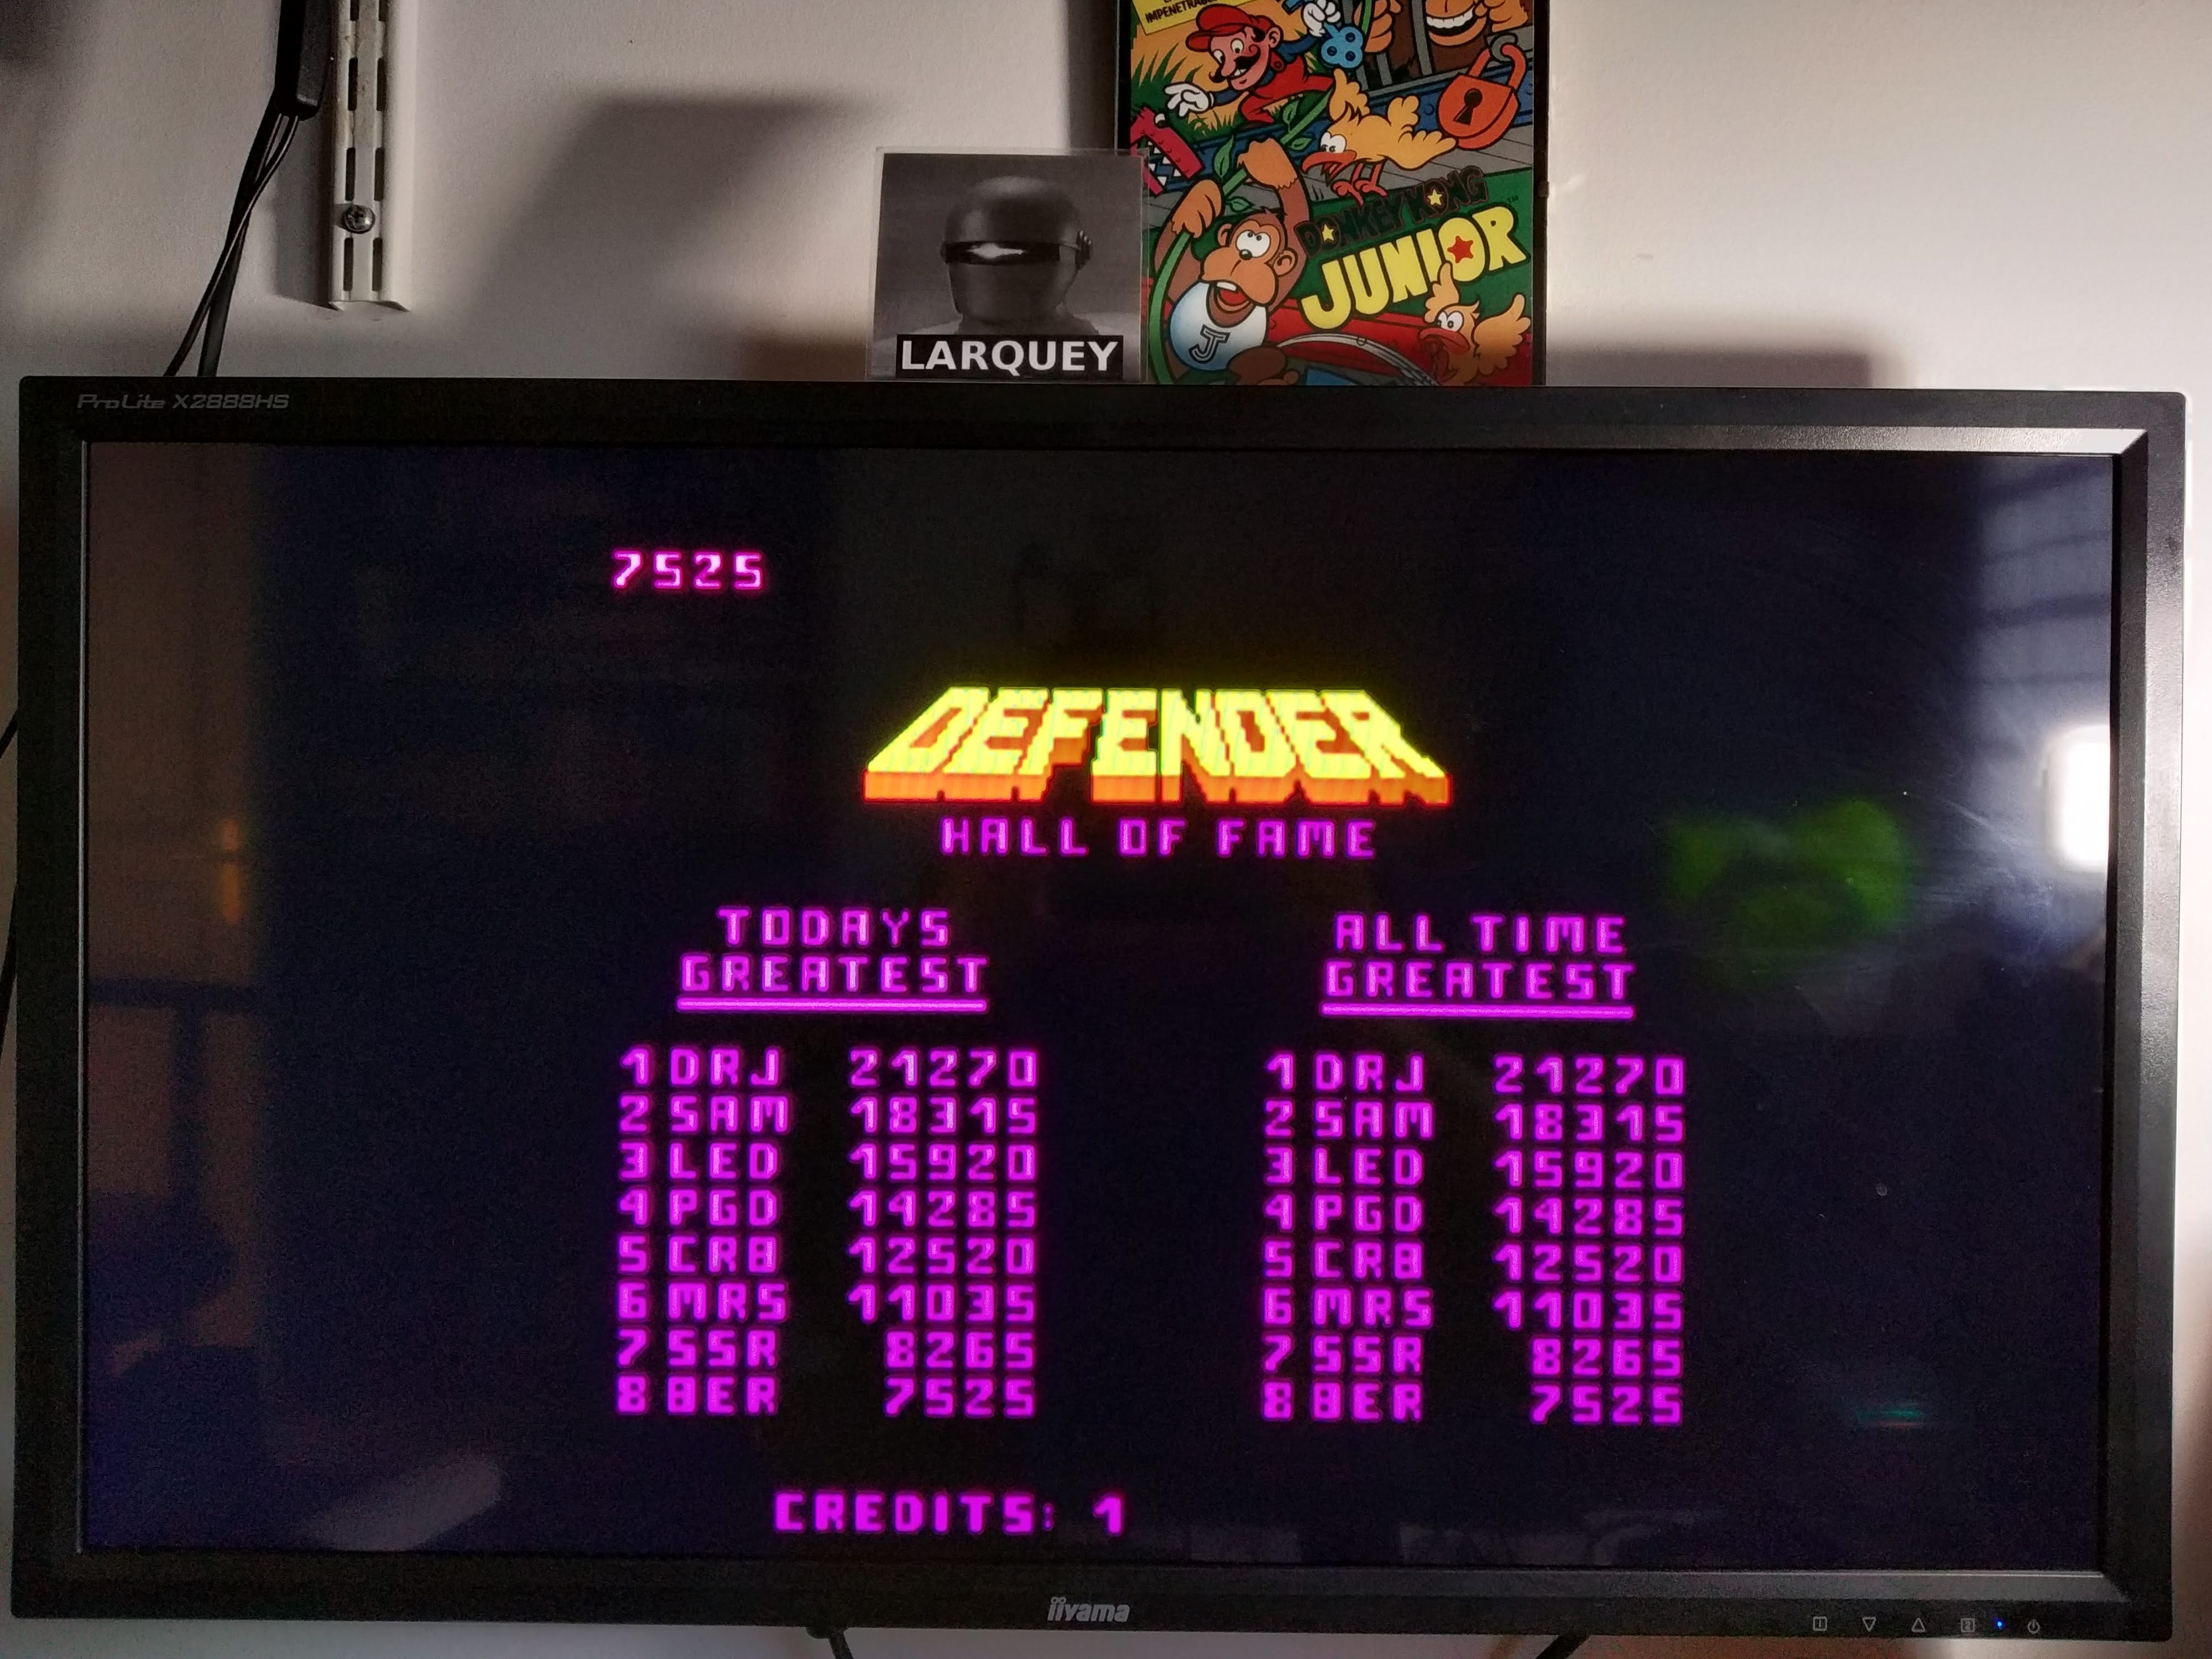 Larquey: Midway Arcade Treasures: Defender (Playstation 2 Emulated) 7,525 points on 2020-08-02 04:28:12